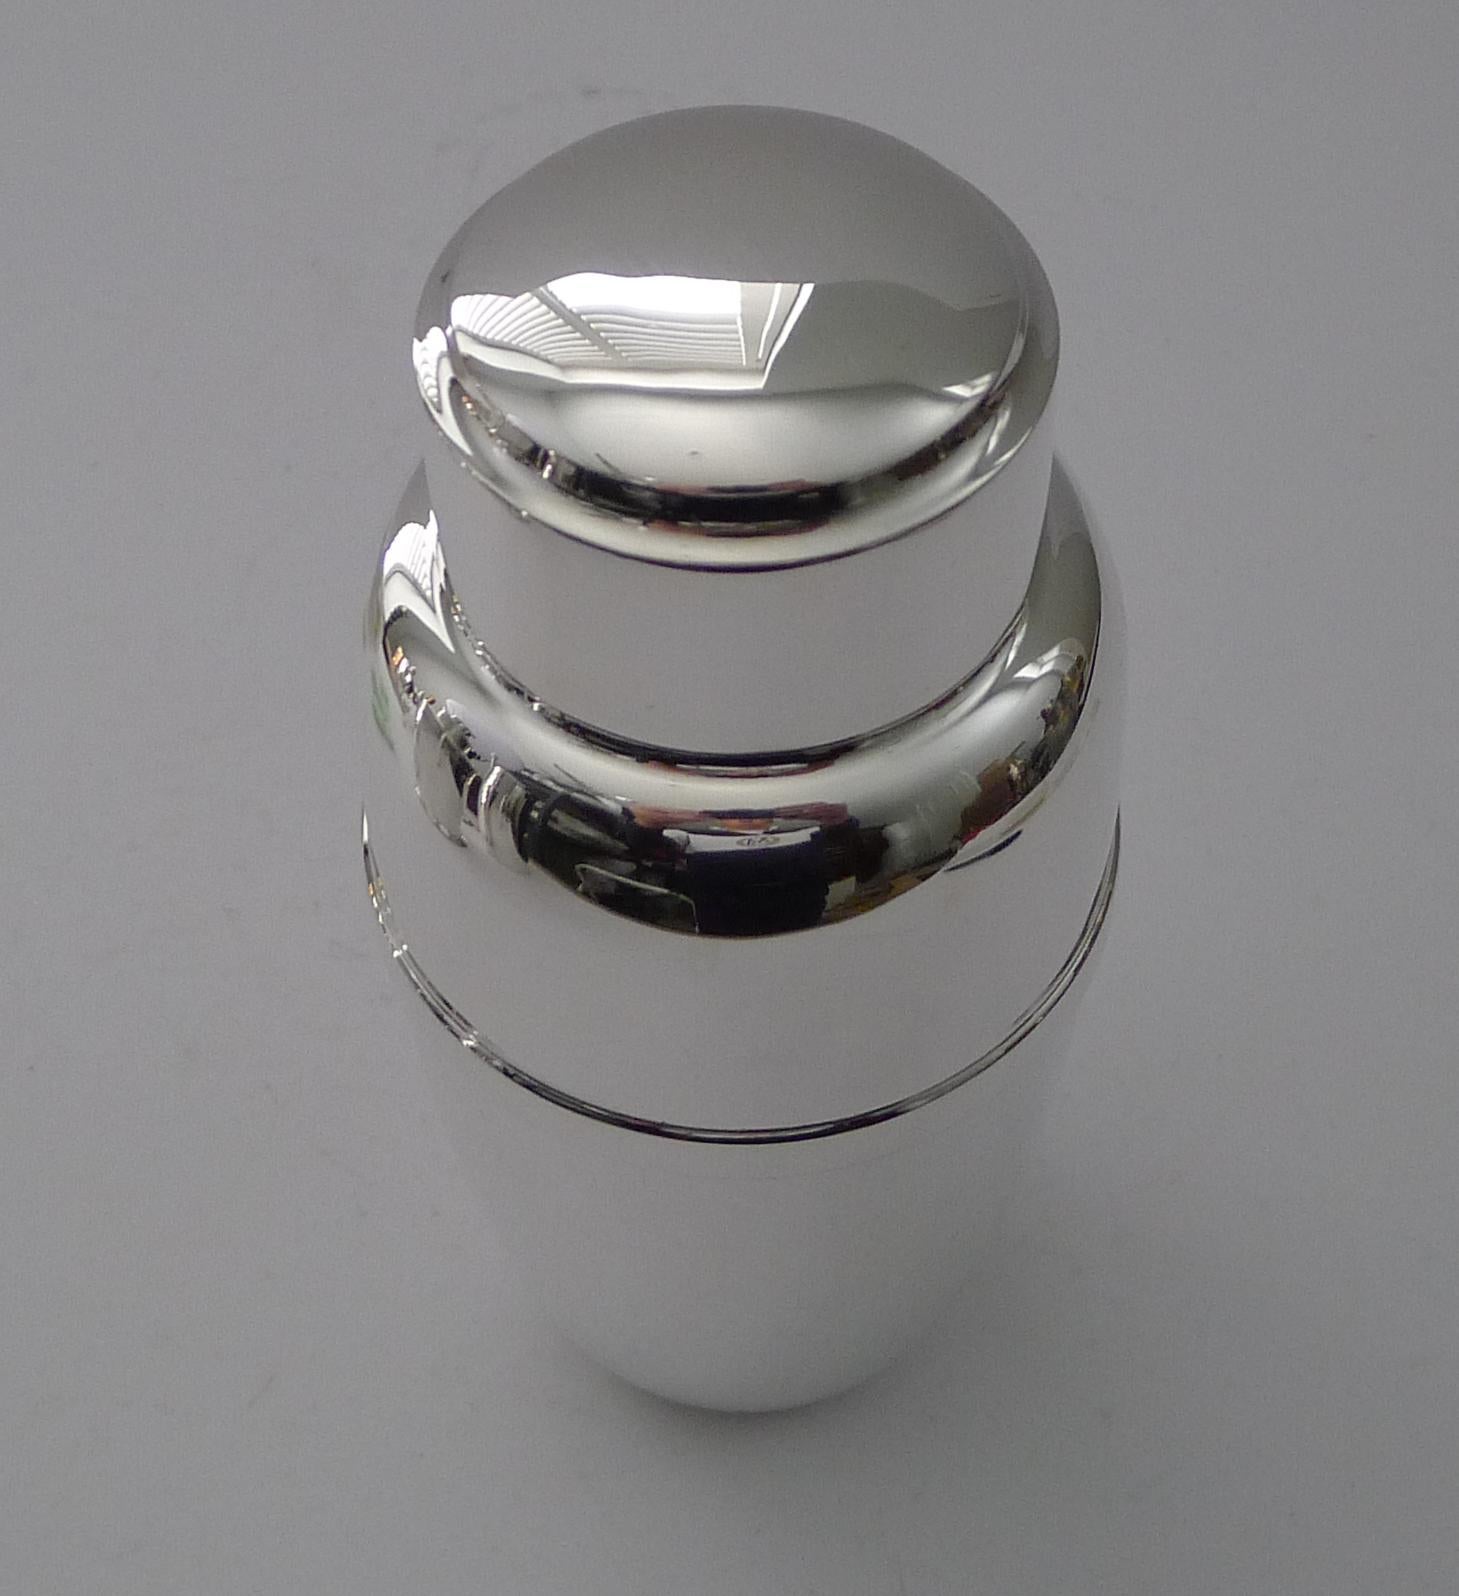 British Art Deco Silver Plated Cocktail Shaker by C S Green & Co. For Sale